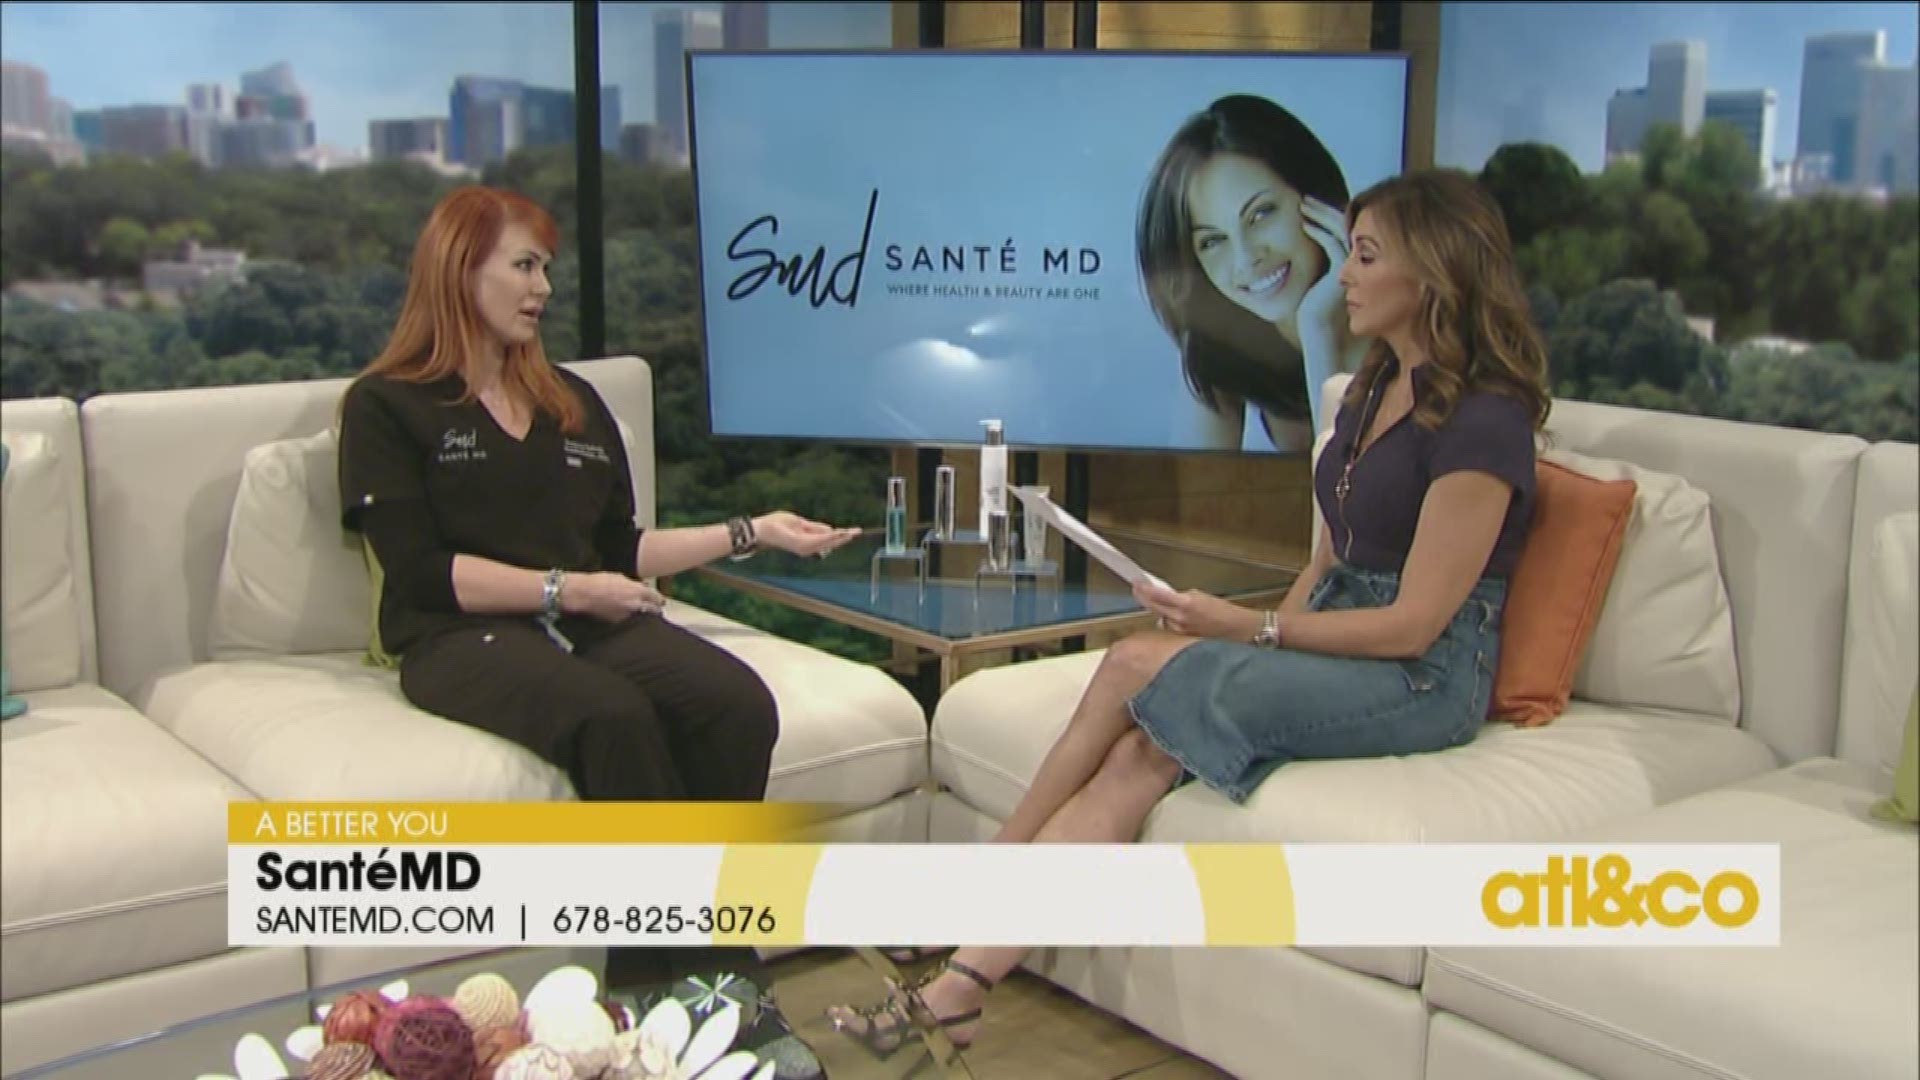 Santé MD breaks down skincare myths and shares an exclusive offer on 'Atlanta & Company'